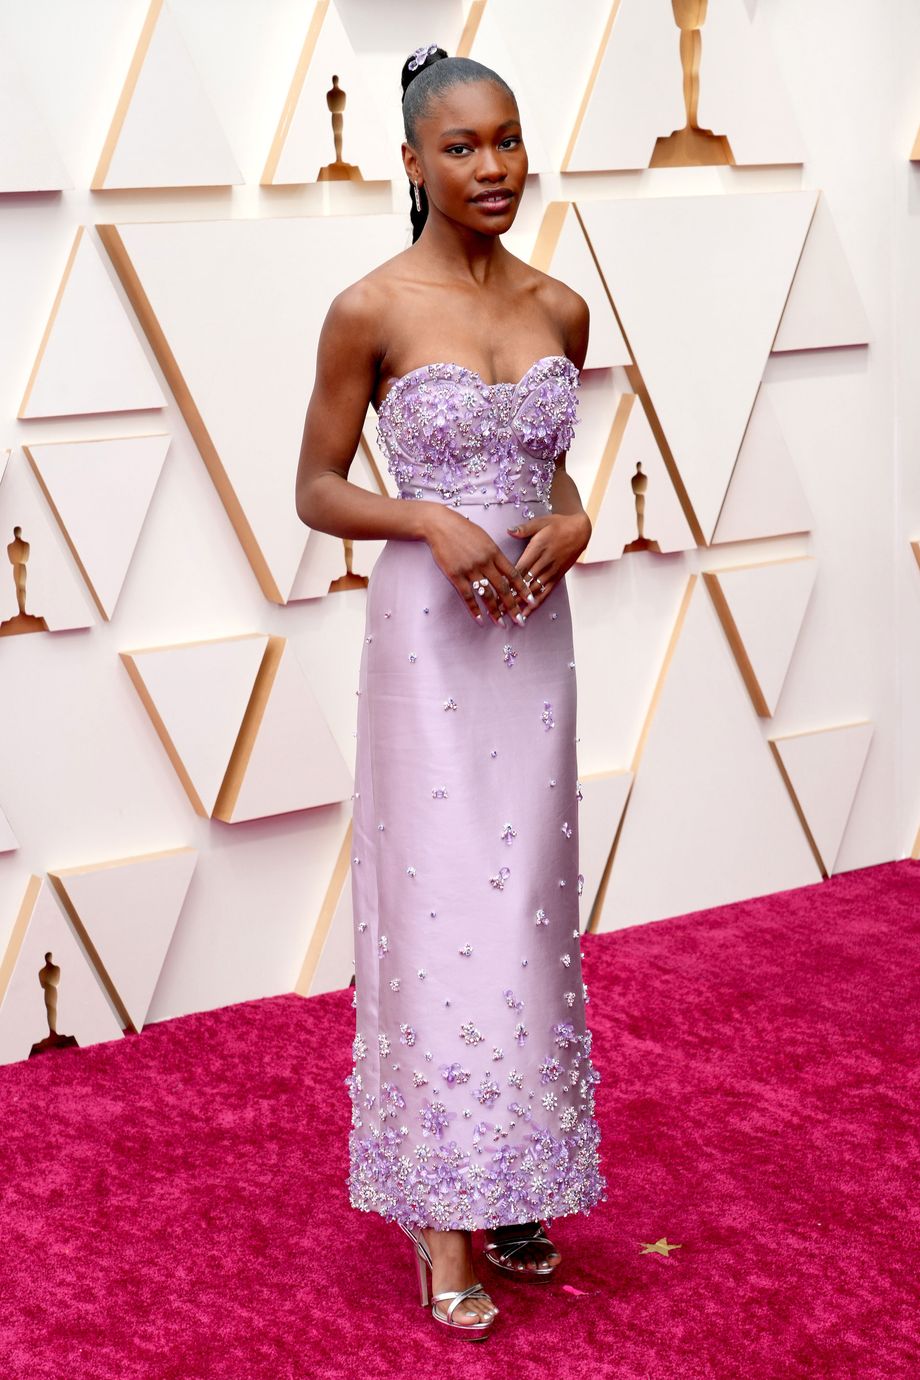 Oscars 2022 Red Carpet Fashion: The Good, The Mermaids and The